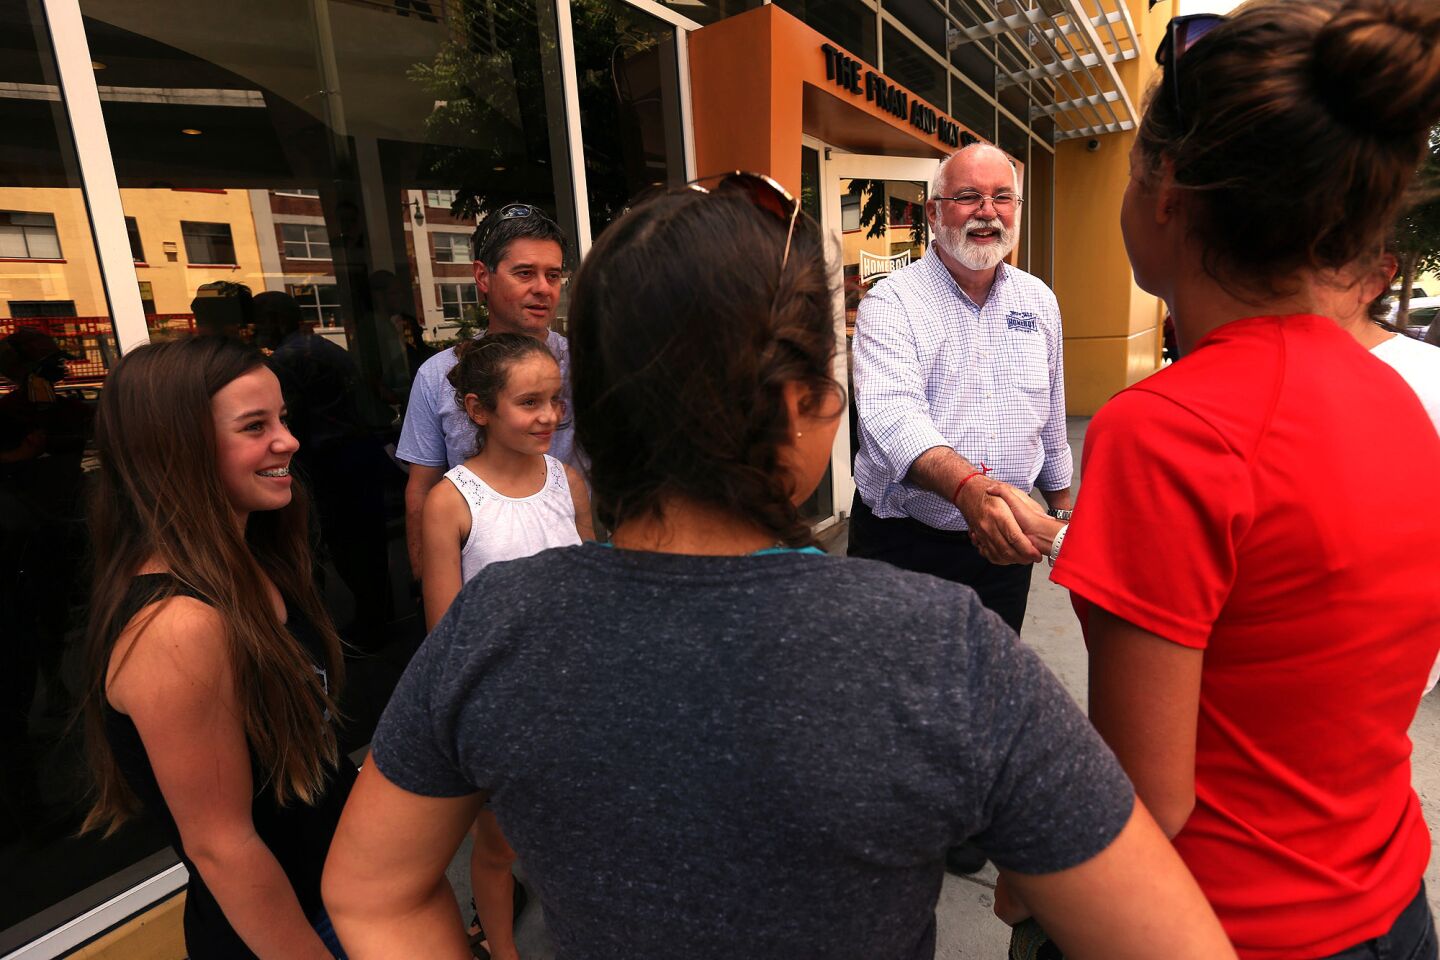 Father Gregory Boyle meets with Bella Newcomb, right, and members of the Snyder family of Santa Cruz. Newcomb is the Snyders' goddaughter.